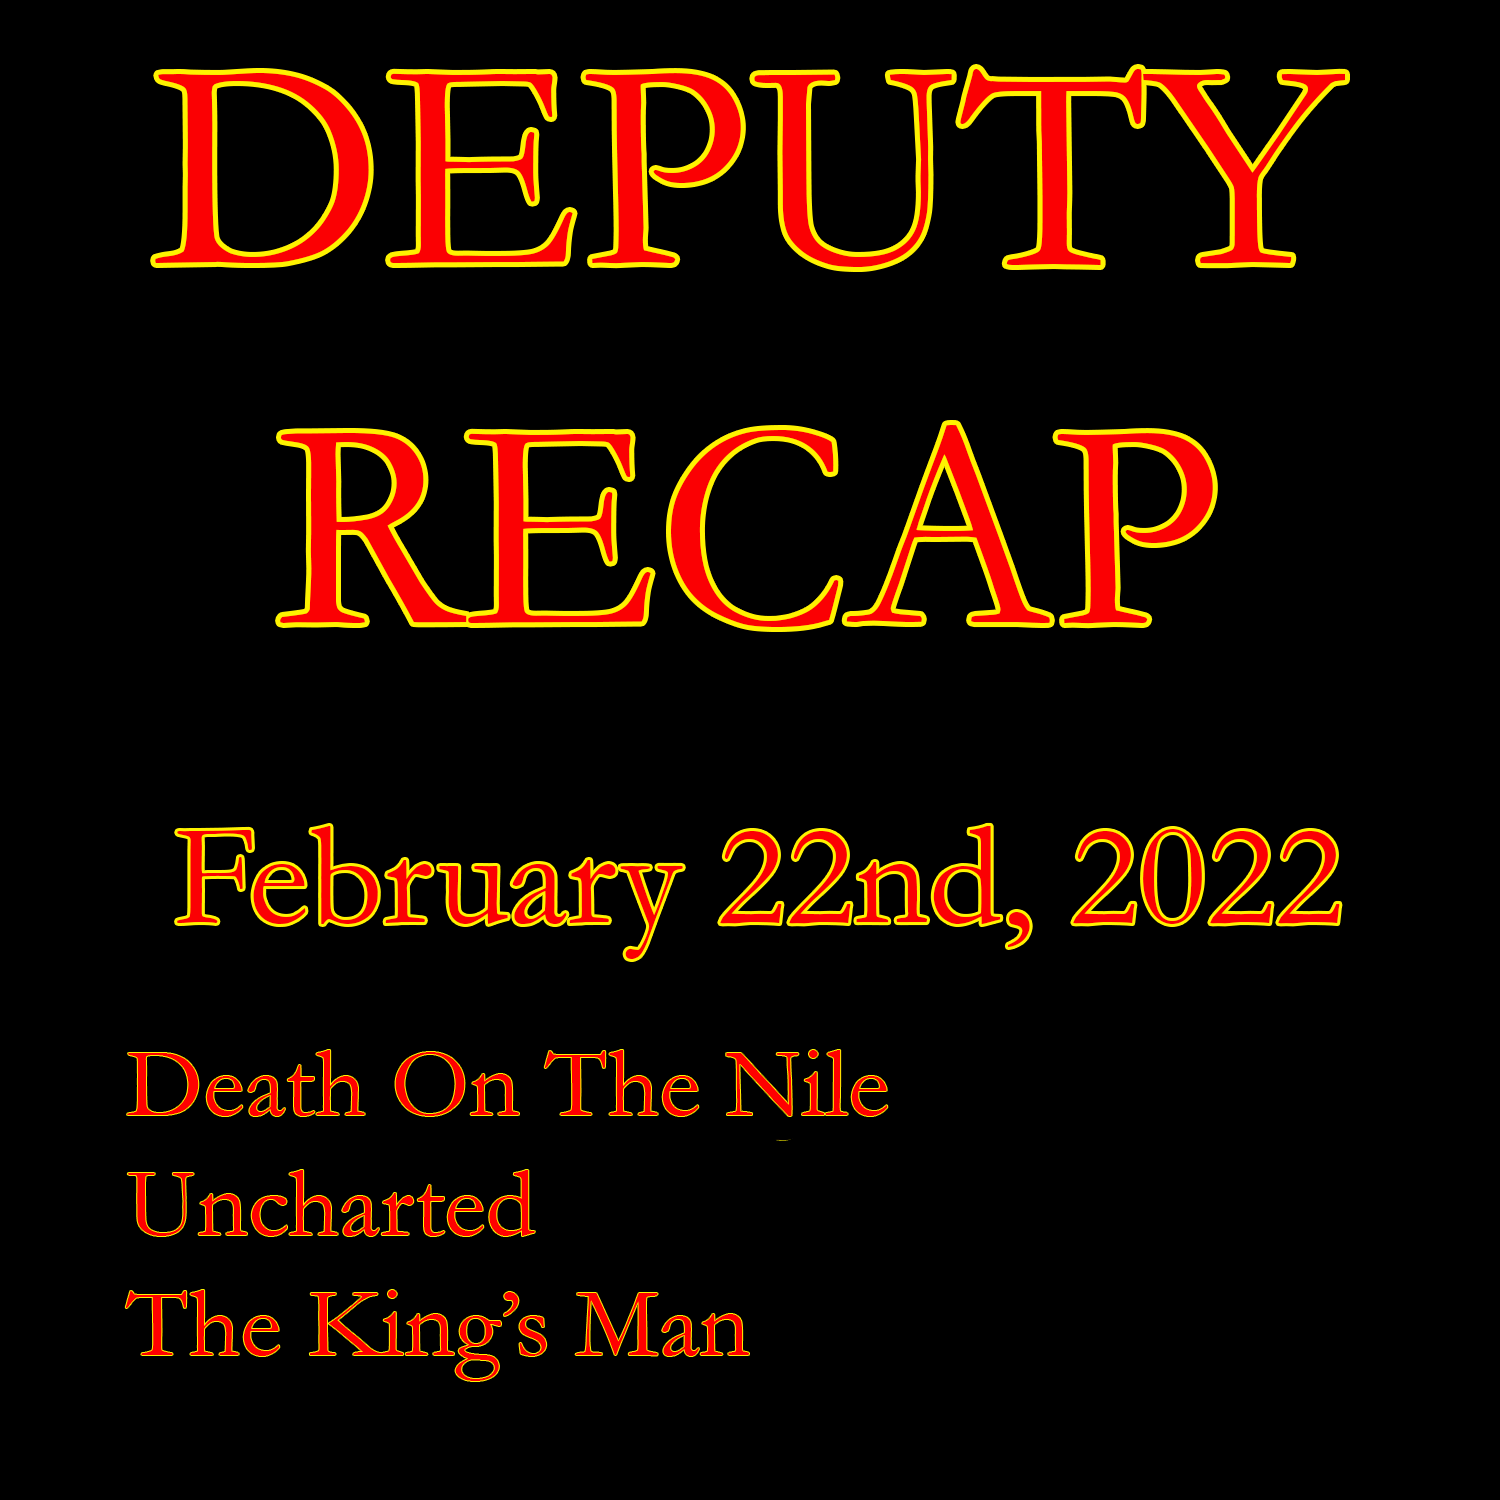 Movie Recap - February 22nd, 2022 (Two's Day / Tuesday)